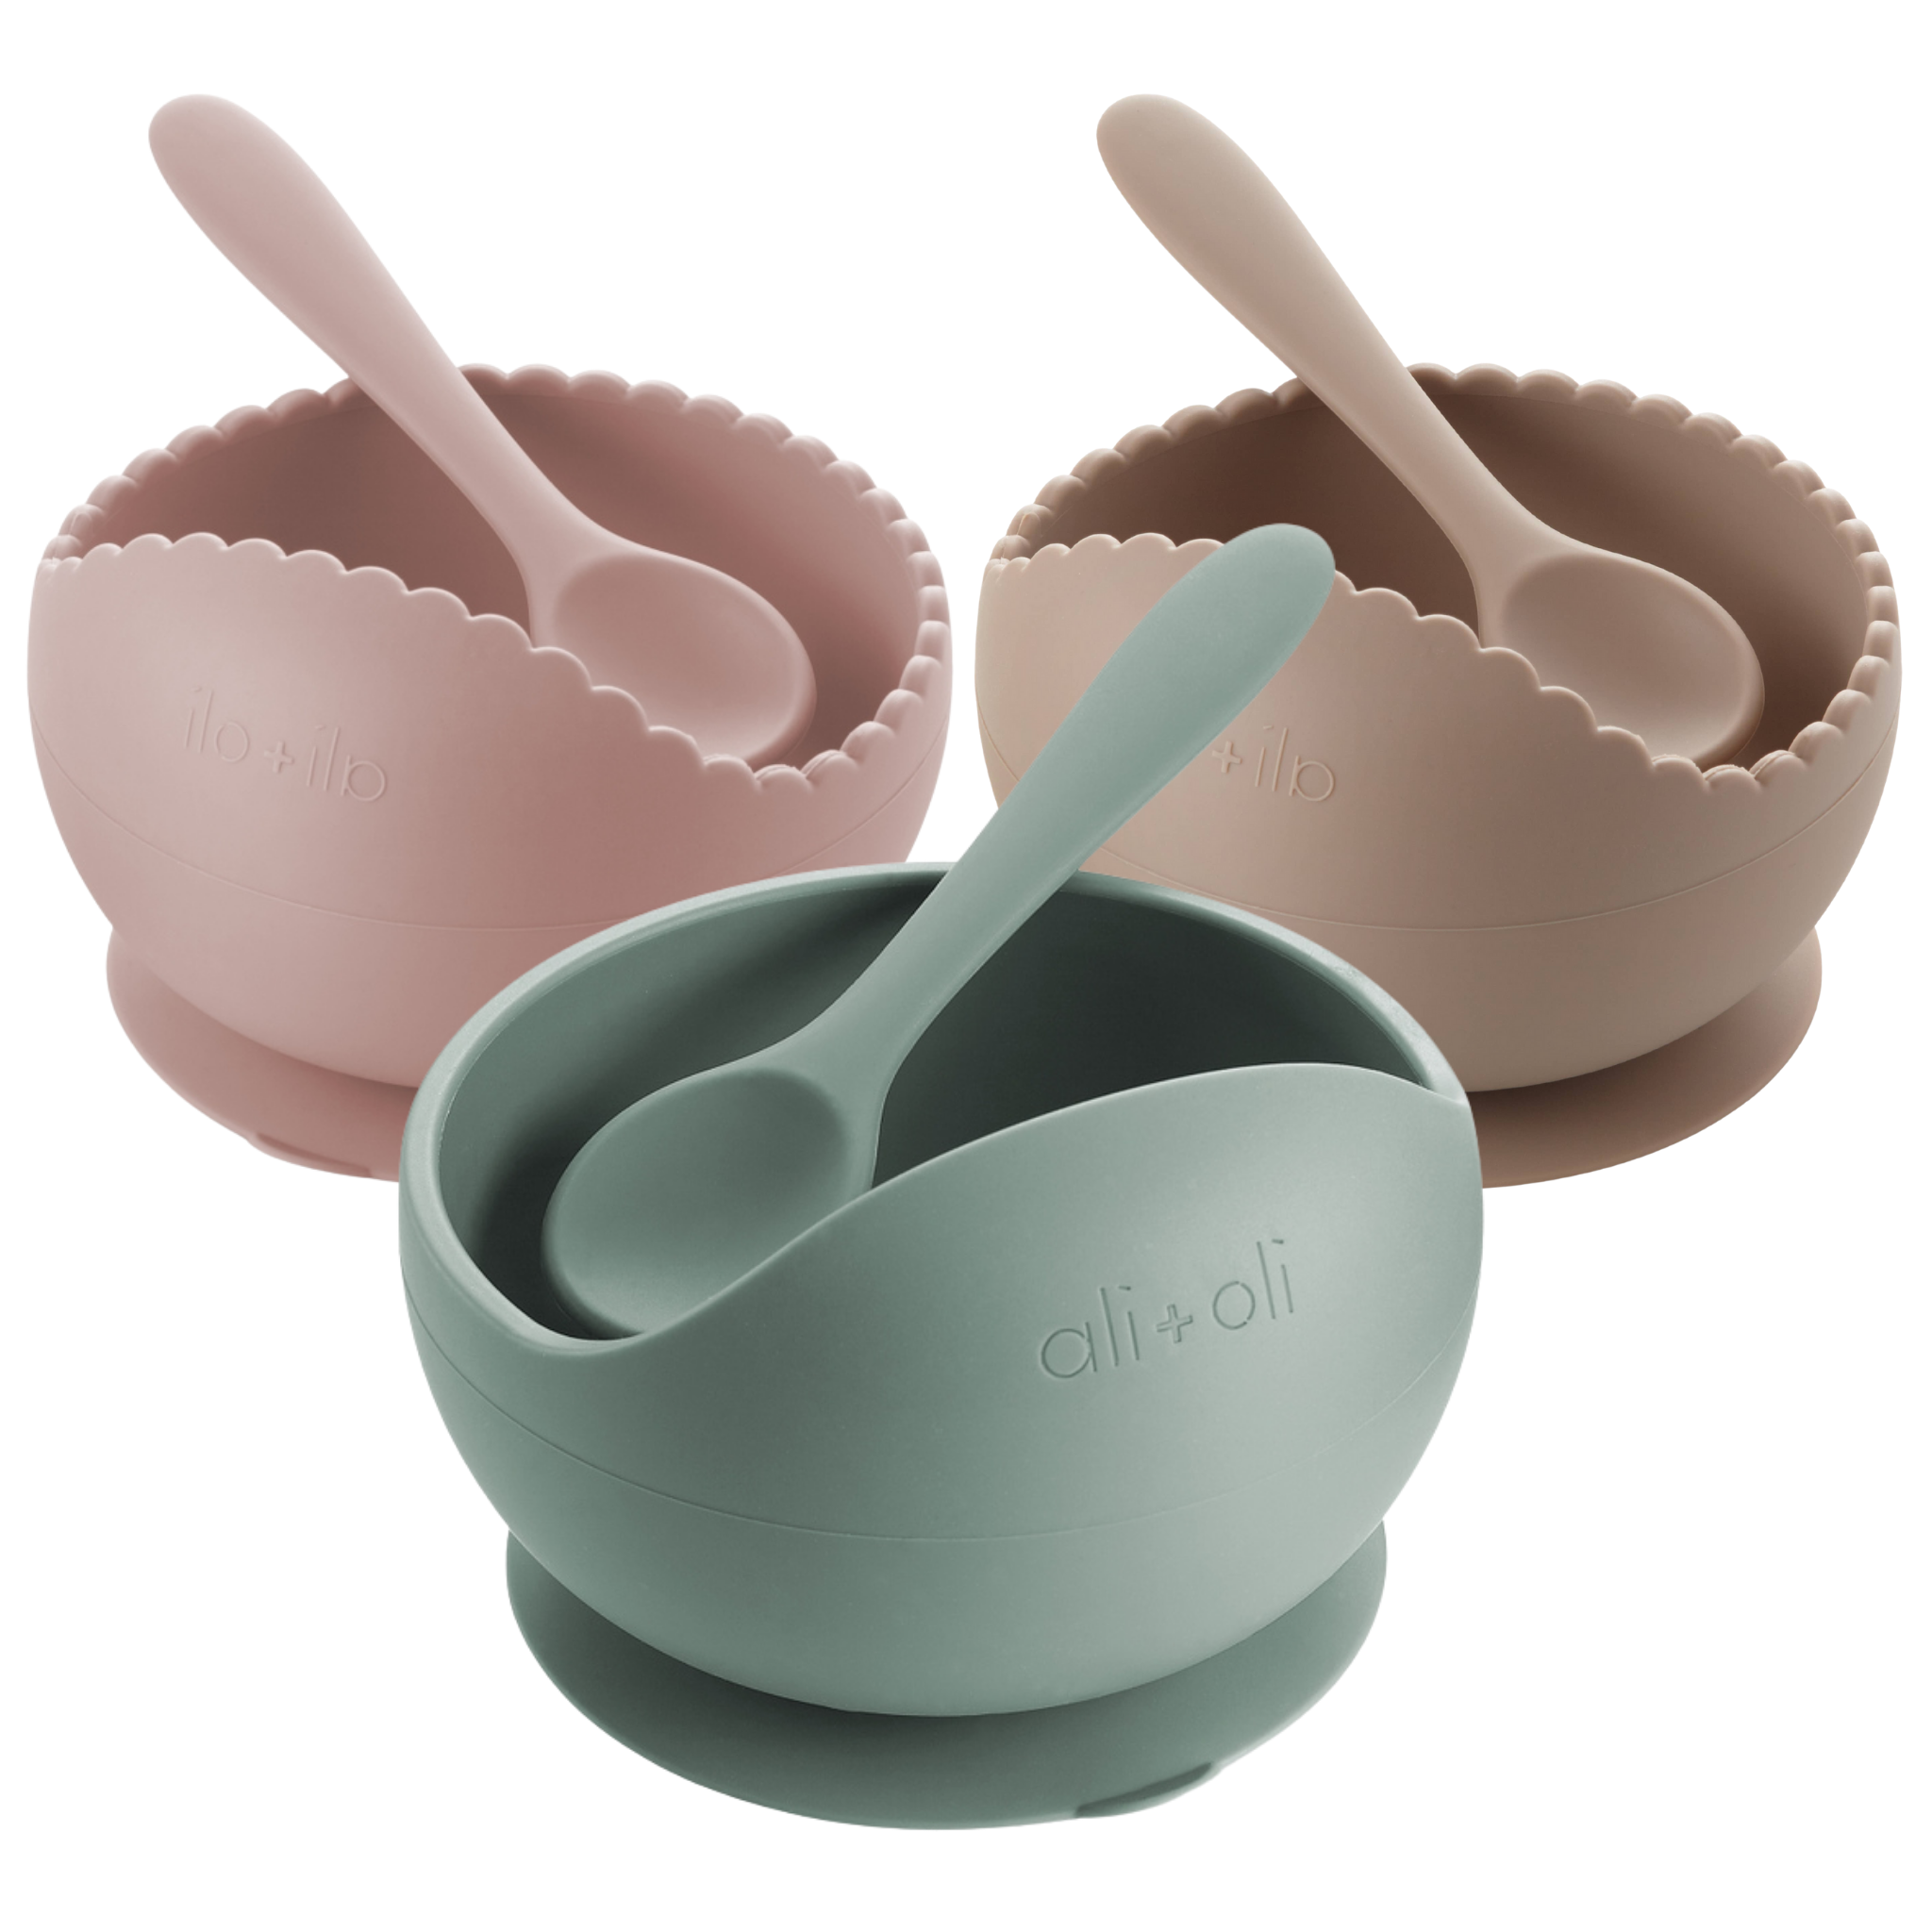 WeeSprout Silicone Baby Spoons - First Stage Feeding Spoons for Infants, Soft-Tip Easy on Gums, Bendable Design Encourages Self-Feeding, Ultra-Durable